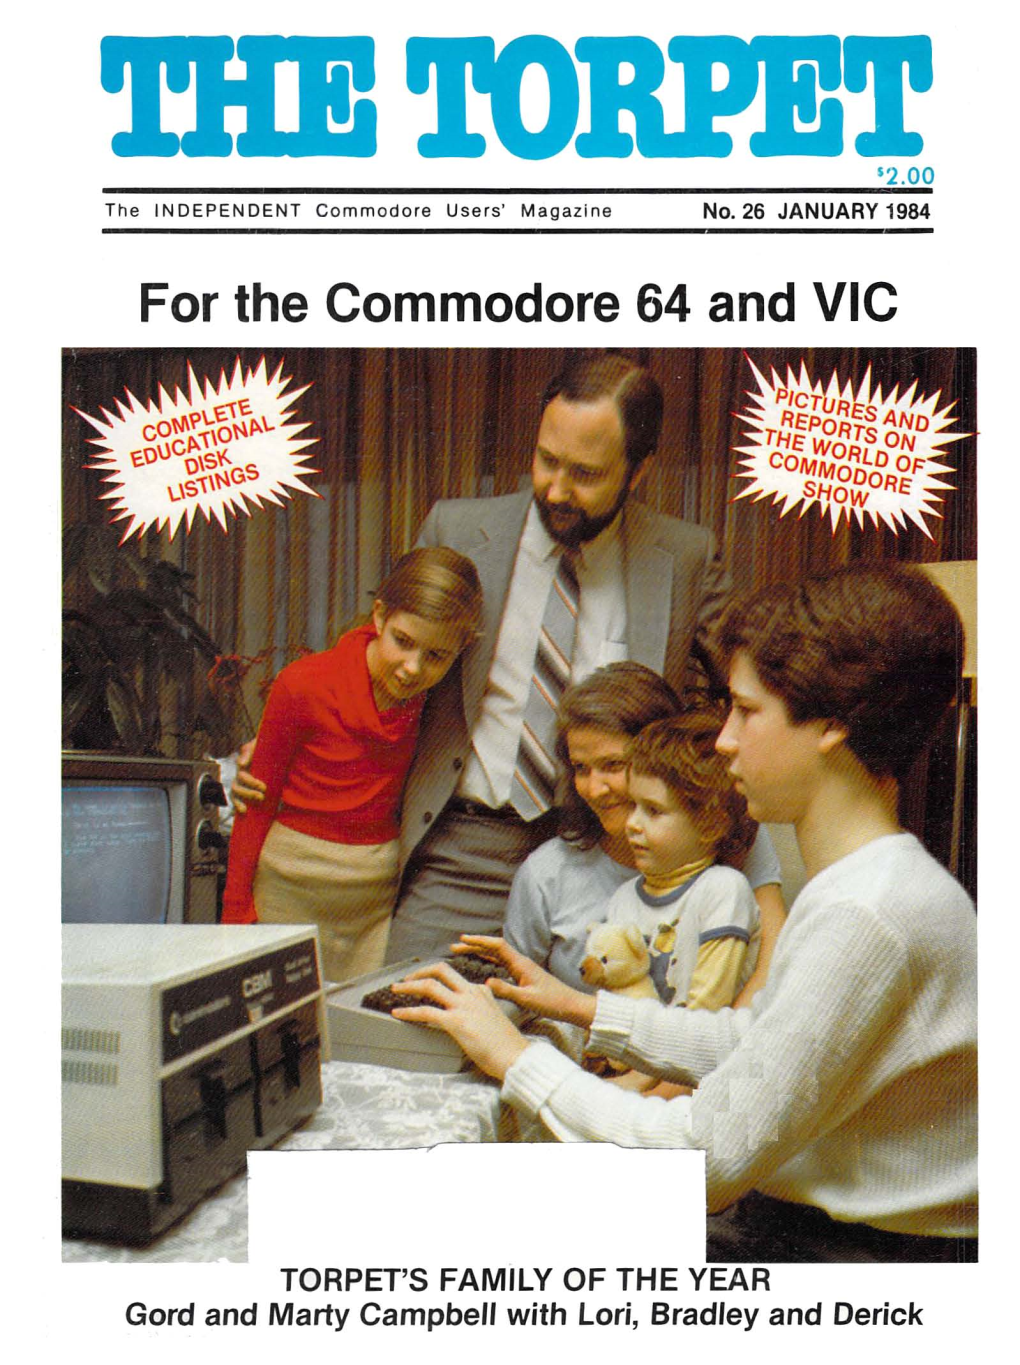 Commodore 64 and VIC